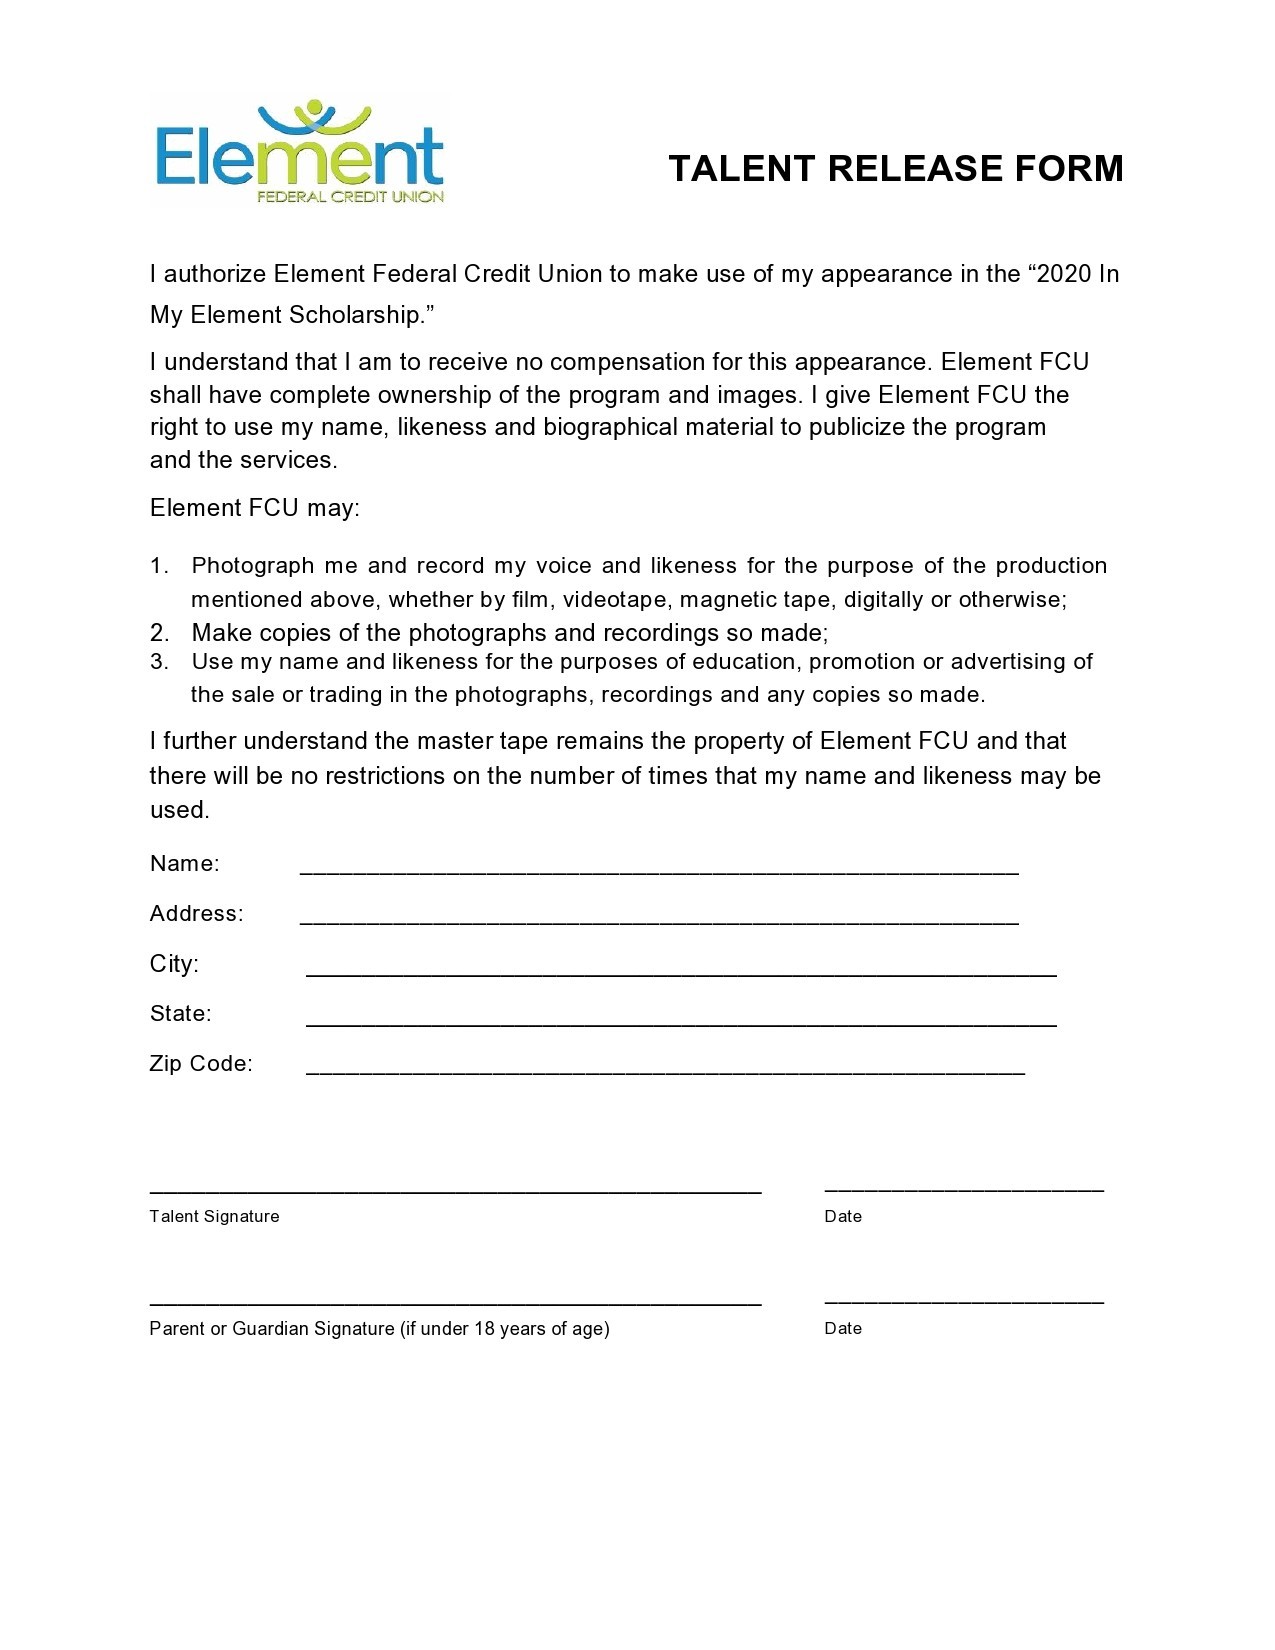 Free talent release form 40